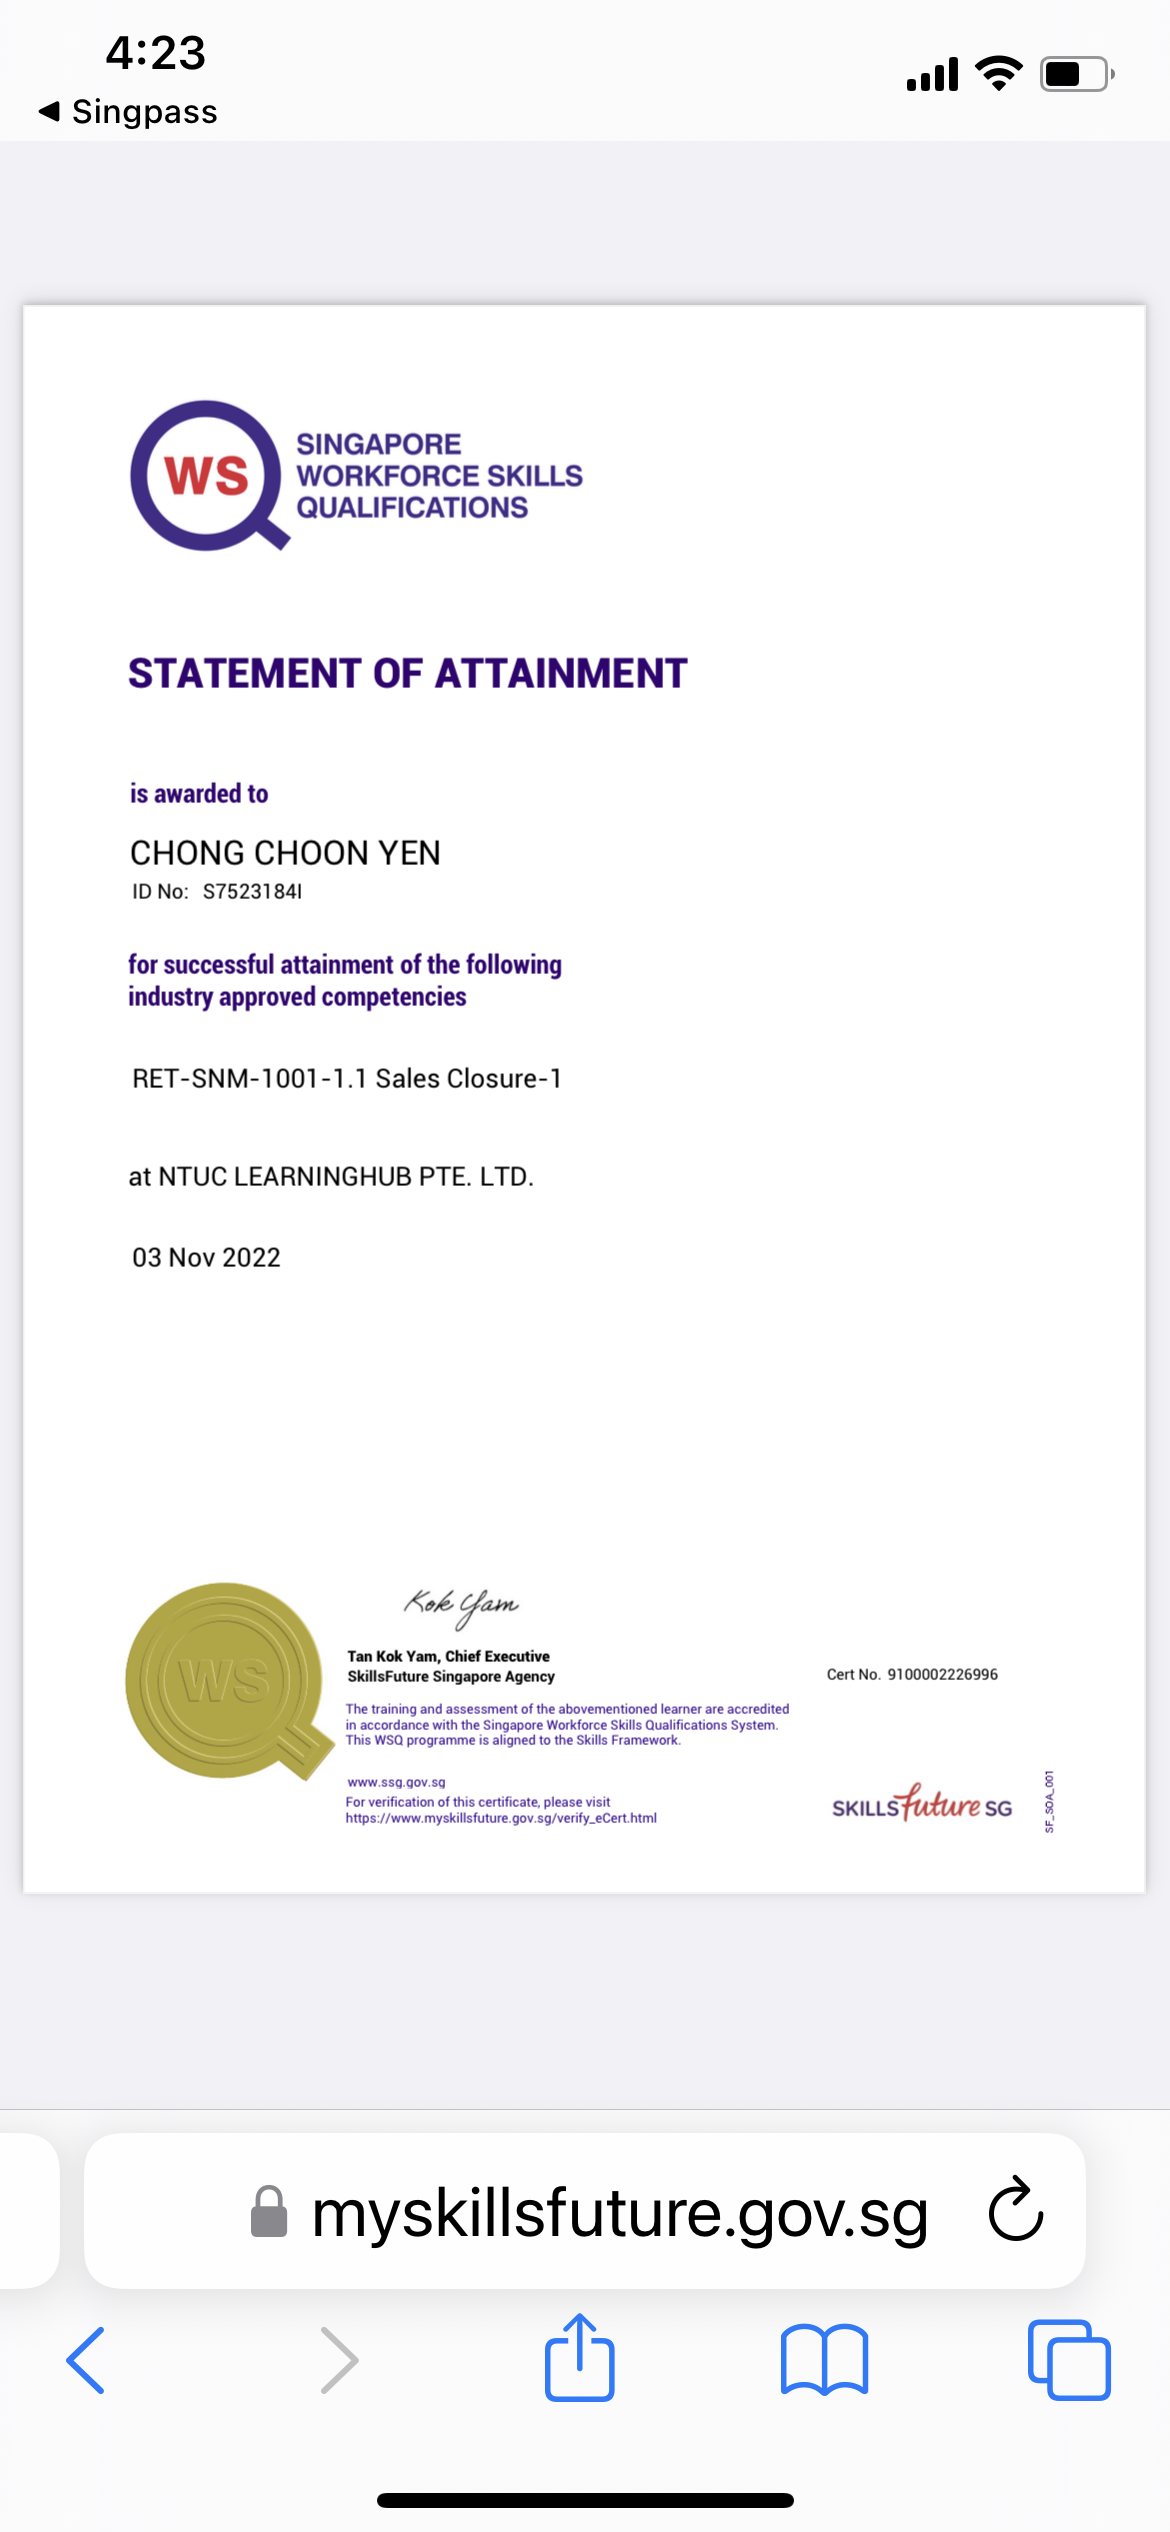 4:23 al S|)

4 Singpass

SINGAPORE
WORKFORCE SKILLS
QUALIFICATIONS

STATEMENT OF ATTAINMENT

is awarded to

CHONG CHOON YEN

ID No: $75231841

for successful attainment of the following
industry approved competencies

RET-SNM-1001-1.1 Sales Closure-1

at NTUC LEARNINGHUB PTE. LTD.

03 Nov 2022

Kok Sam

Tan Kok Yam, Chéef Executive
SlllsFuture Singapore Agency Cert No. 9100002226996

The trang and assessment of the abovementioned learer are accredited
n accordance with the Sgapcre Workforce Skills Quakficabons System
This WSQ programme is signed 1o the Skill Framework

 

www 333 90v 50 8

For verification of this certificate. please visit b-1
i
Pi1p3./ www myskillsfuture gov 33/veny_eCert him SKILLS s¢ 1

&amp; myskillsfuture.gov.sg C
&lt; Mh Mm